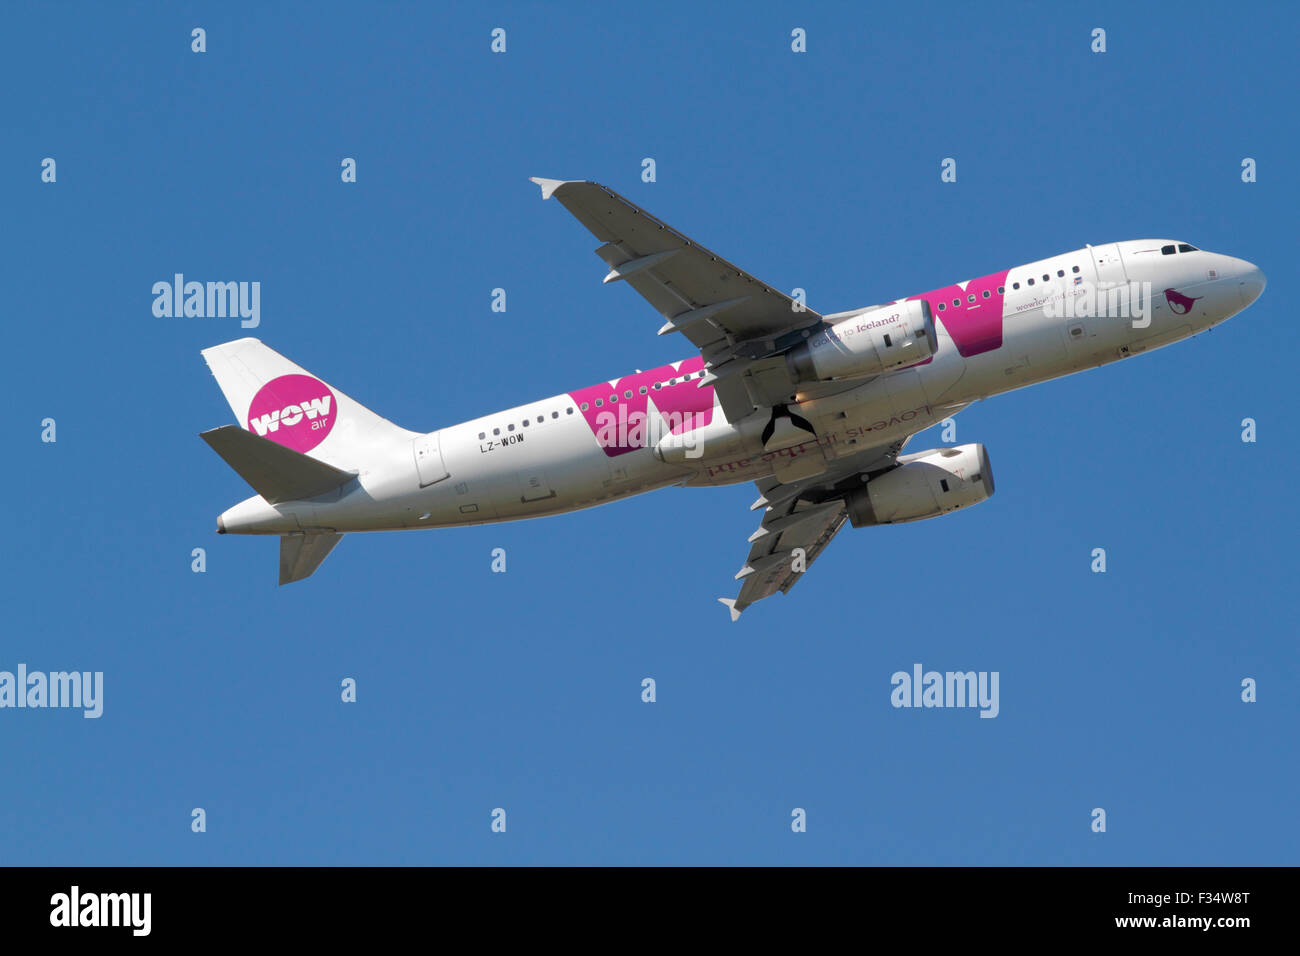 WOW Air, Airbus A320-232, LZ-WOW, flight WW903, takes off from Kastrup Airport CPH for Reykjavik, Iceland Stock Photo